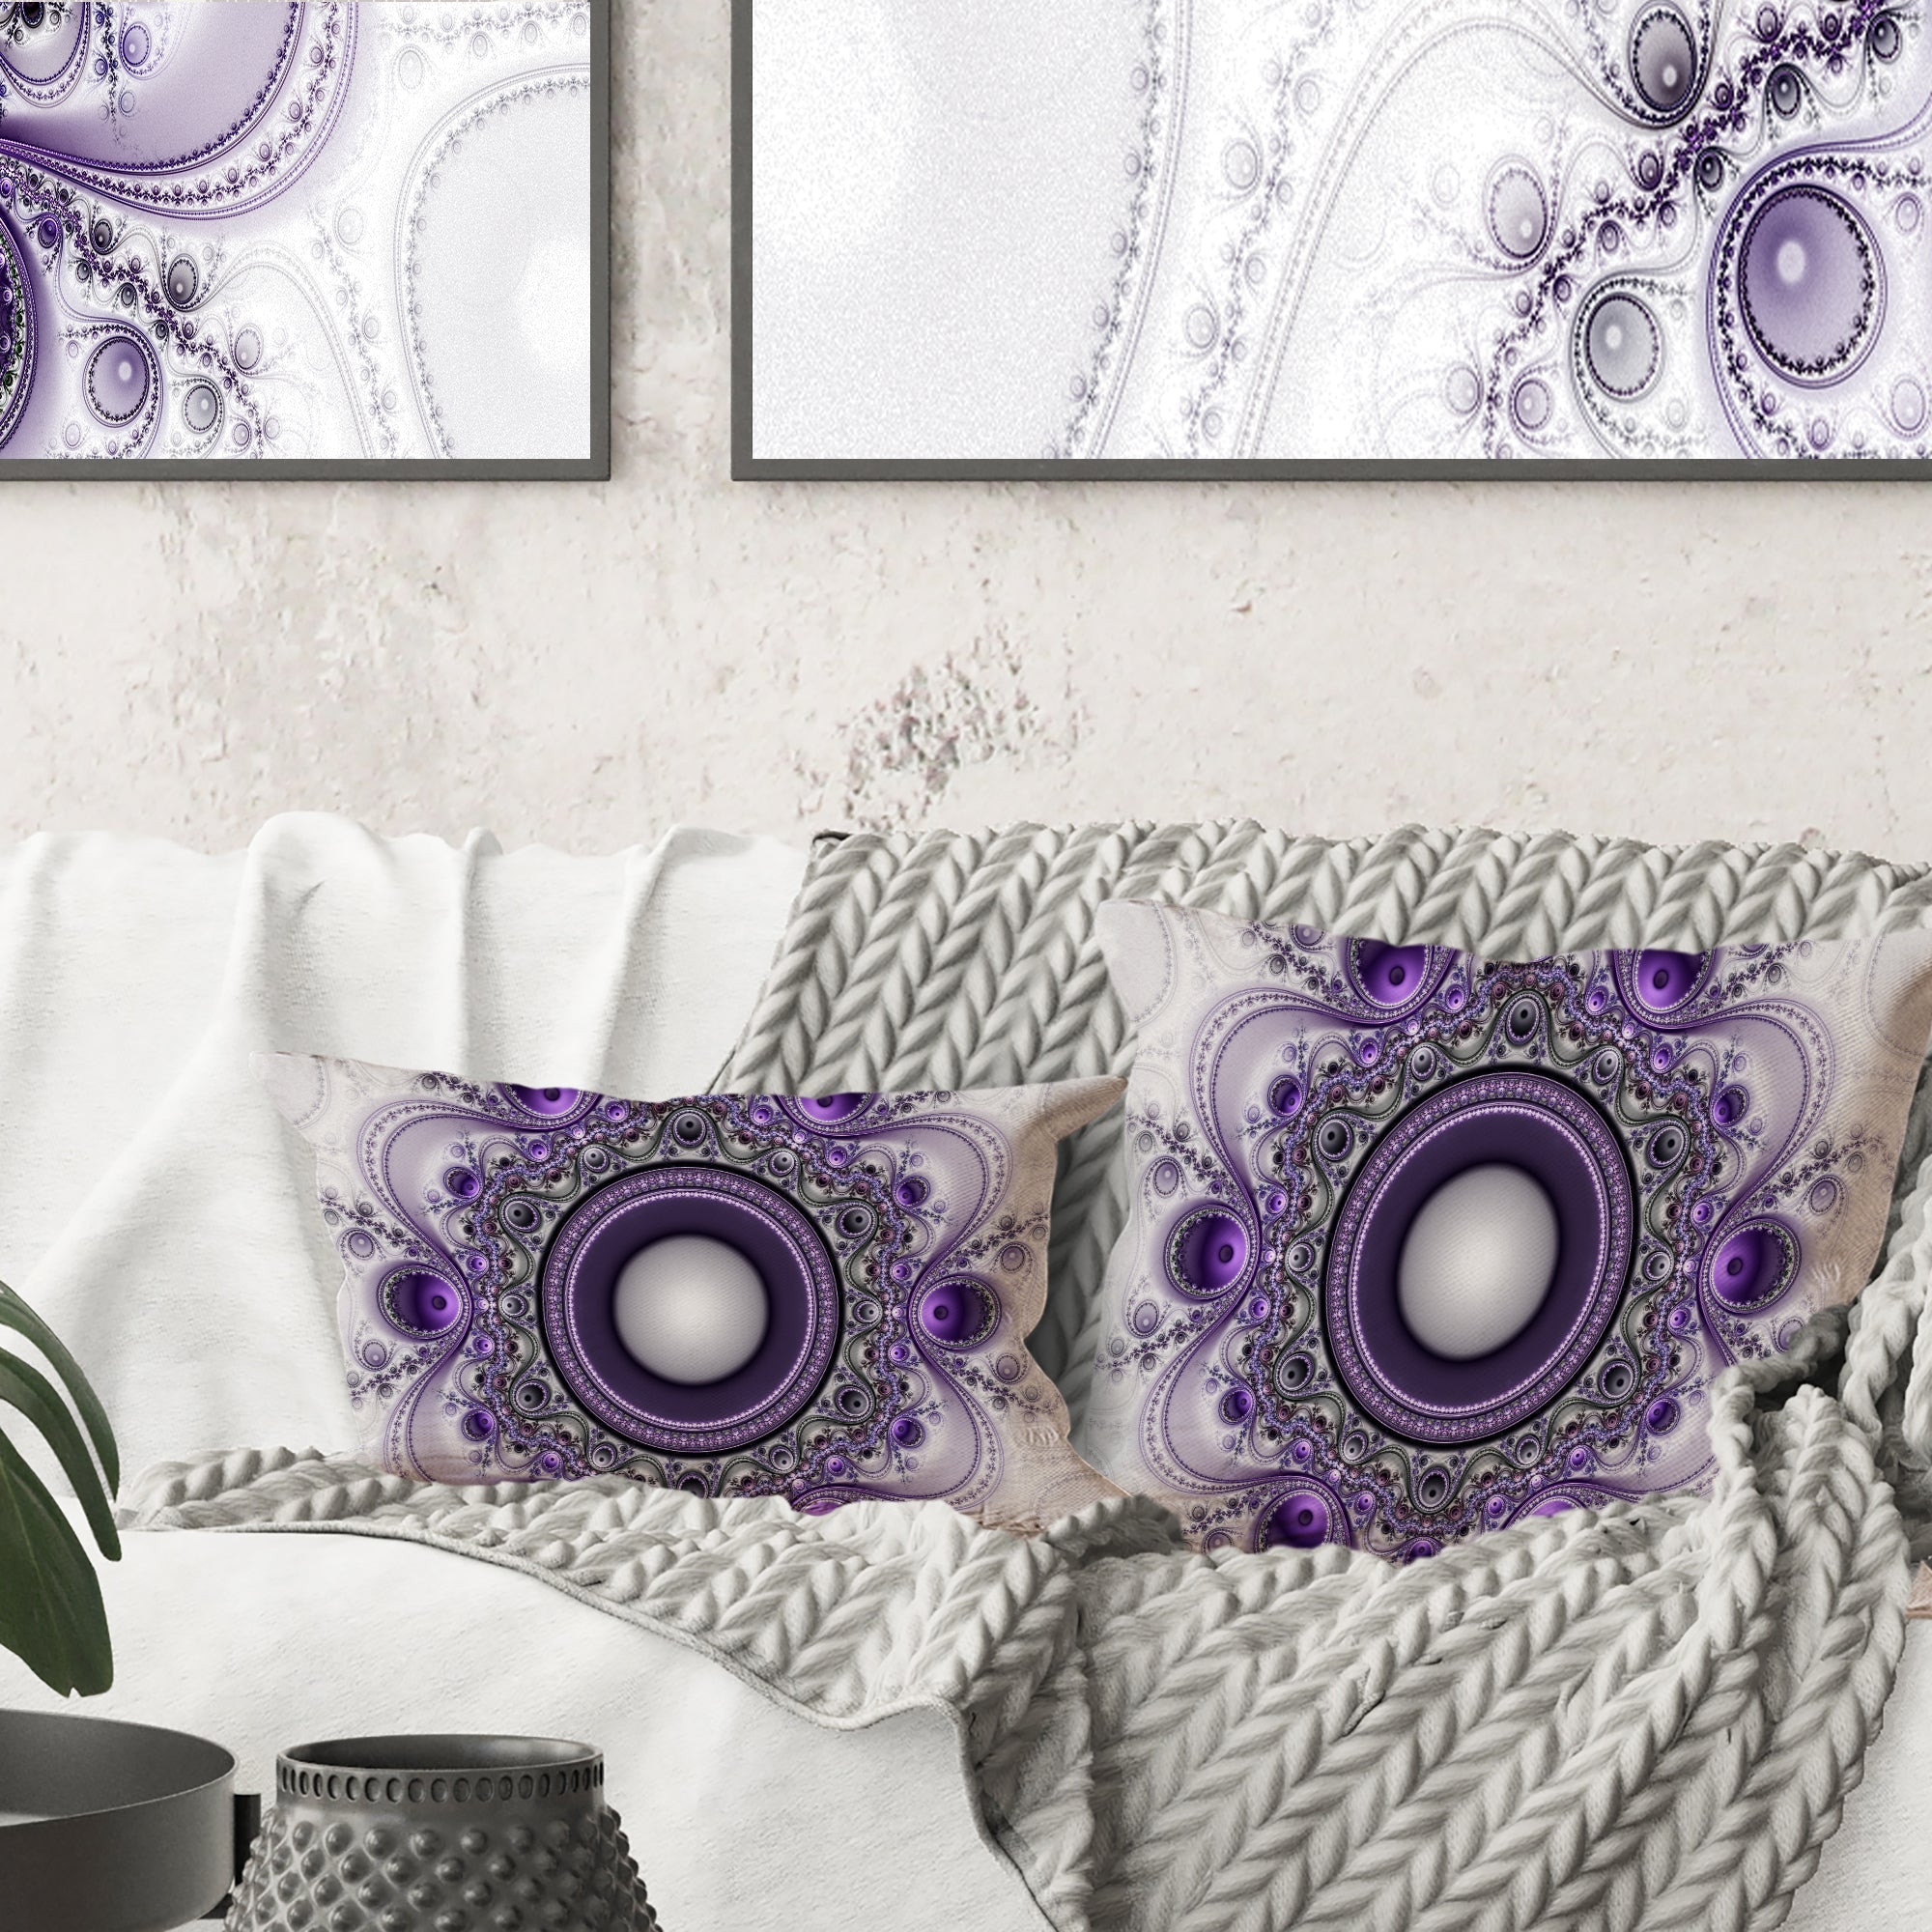 Purple Fractal Pattern with Circles - Abstract Throw Pillow